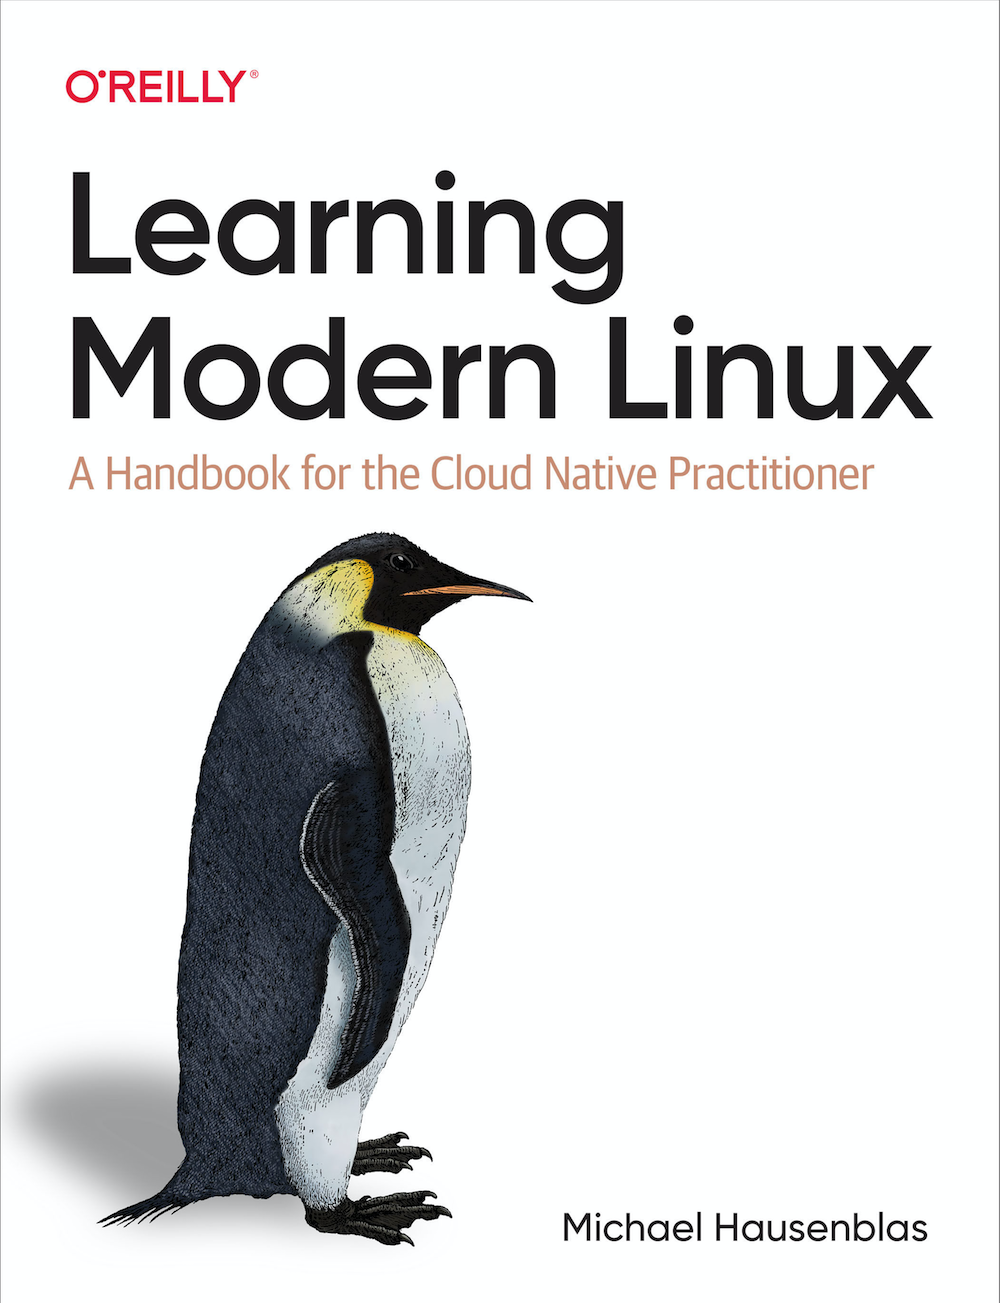 O'Reilly: Learning Modern Linux